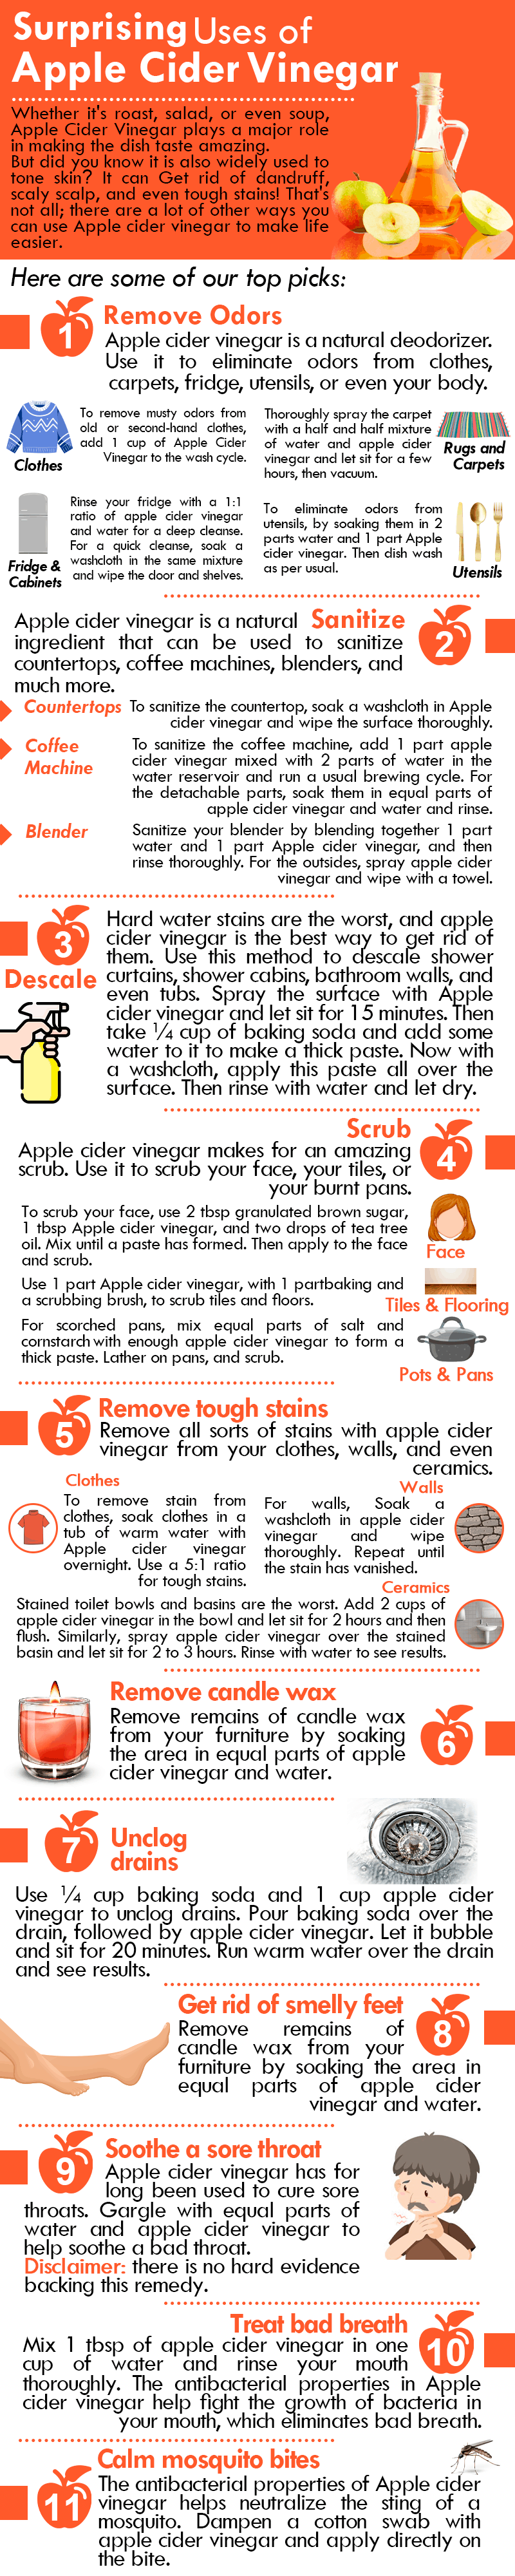 uses of apple cider vinegar in your daily life